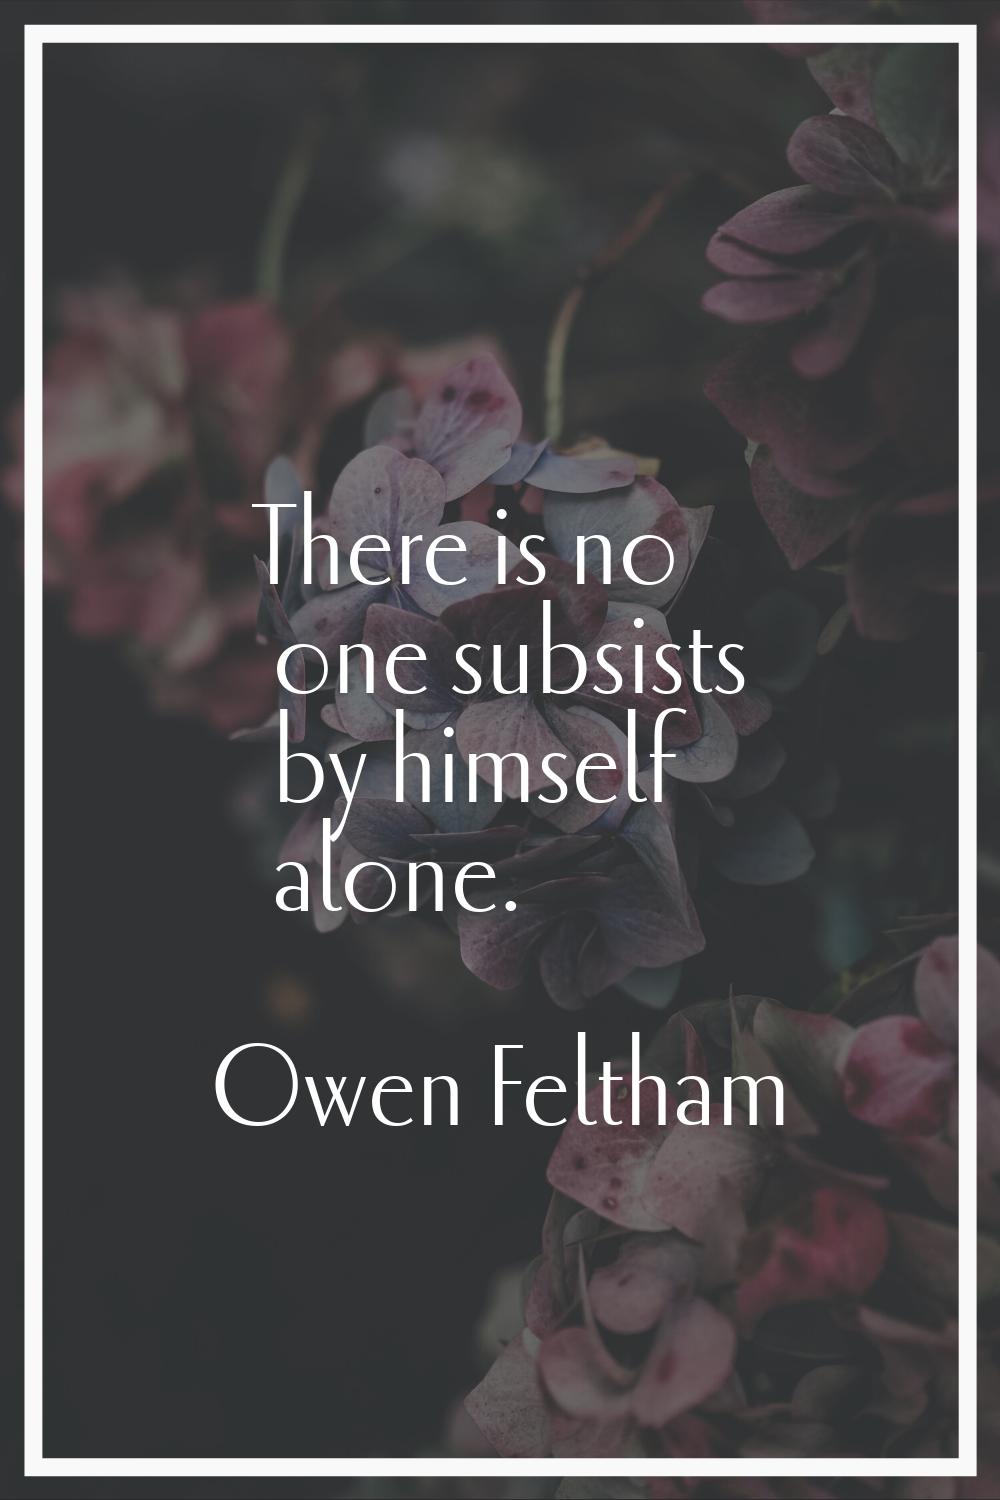 There is no one subsists by himself alone.